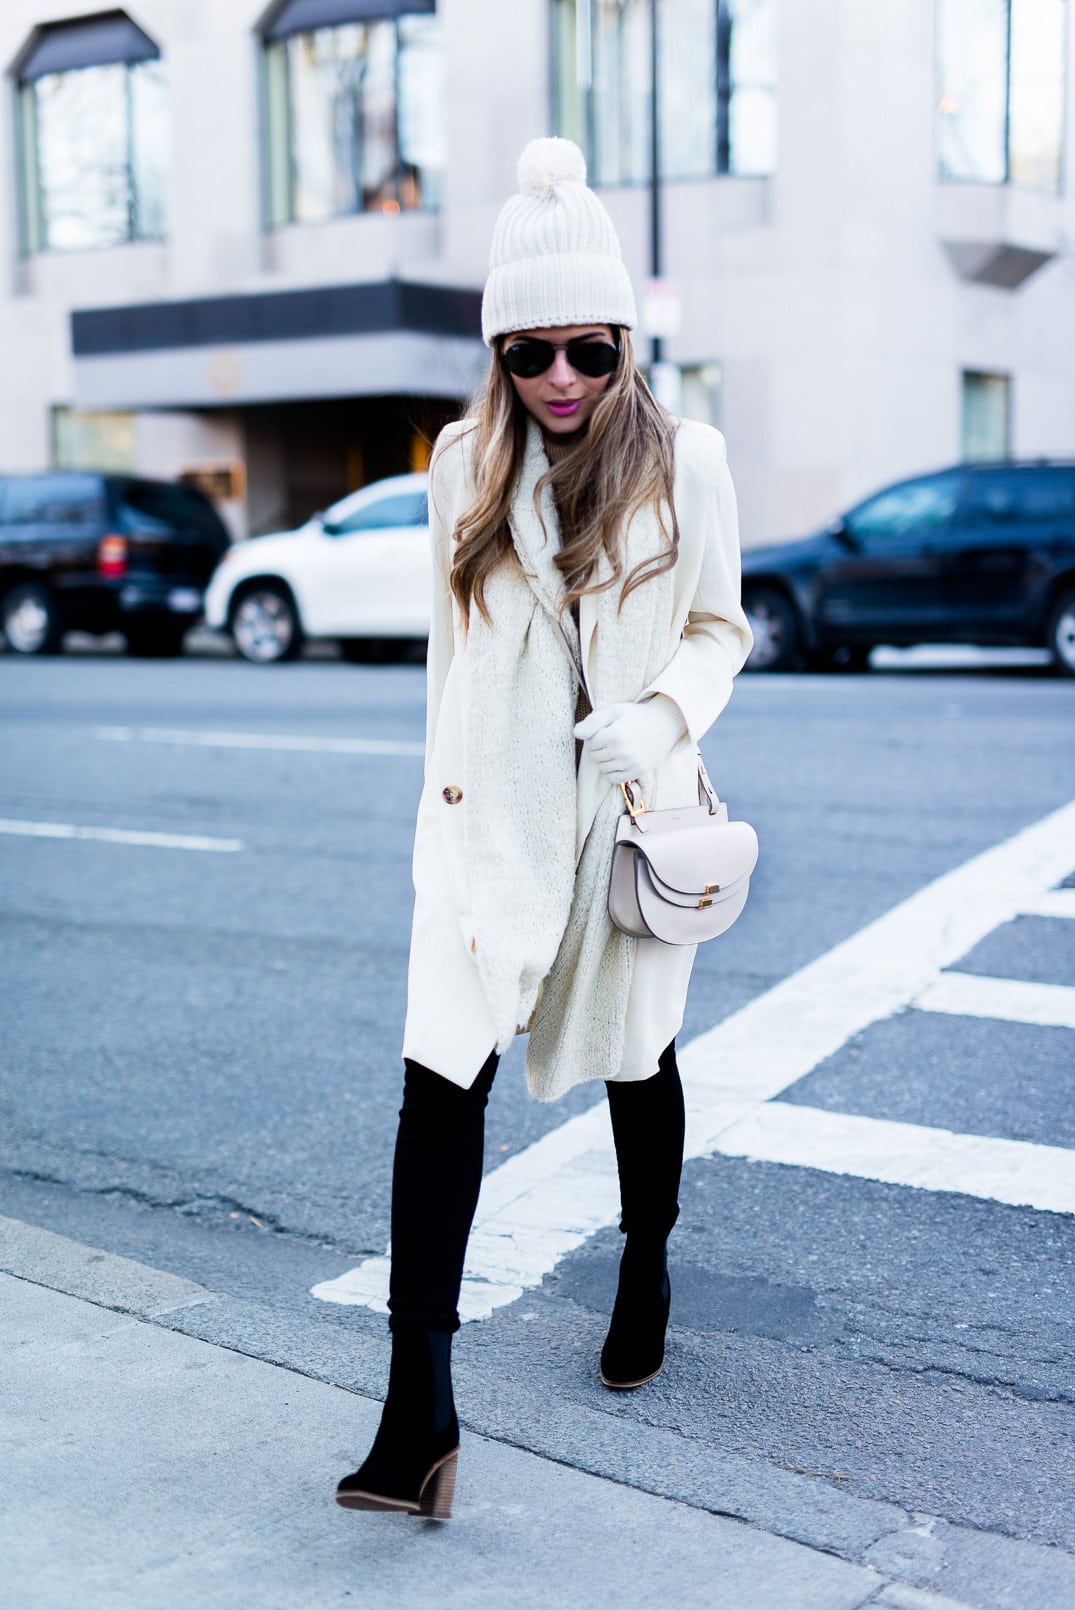 Pam Hetlinger, The Girl From Panama wearing a Chicwish Coat, Camel Turtleneck, Forever21 Pom Pom Beanie, Black Skinny Jeans, Mango booties and Forever 21 Scarf